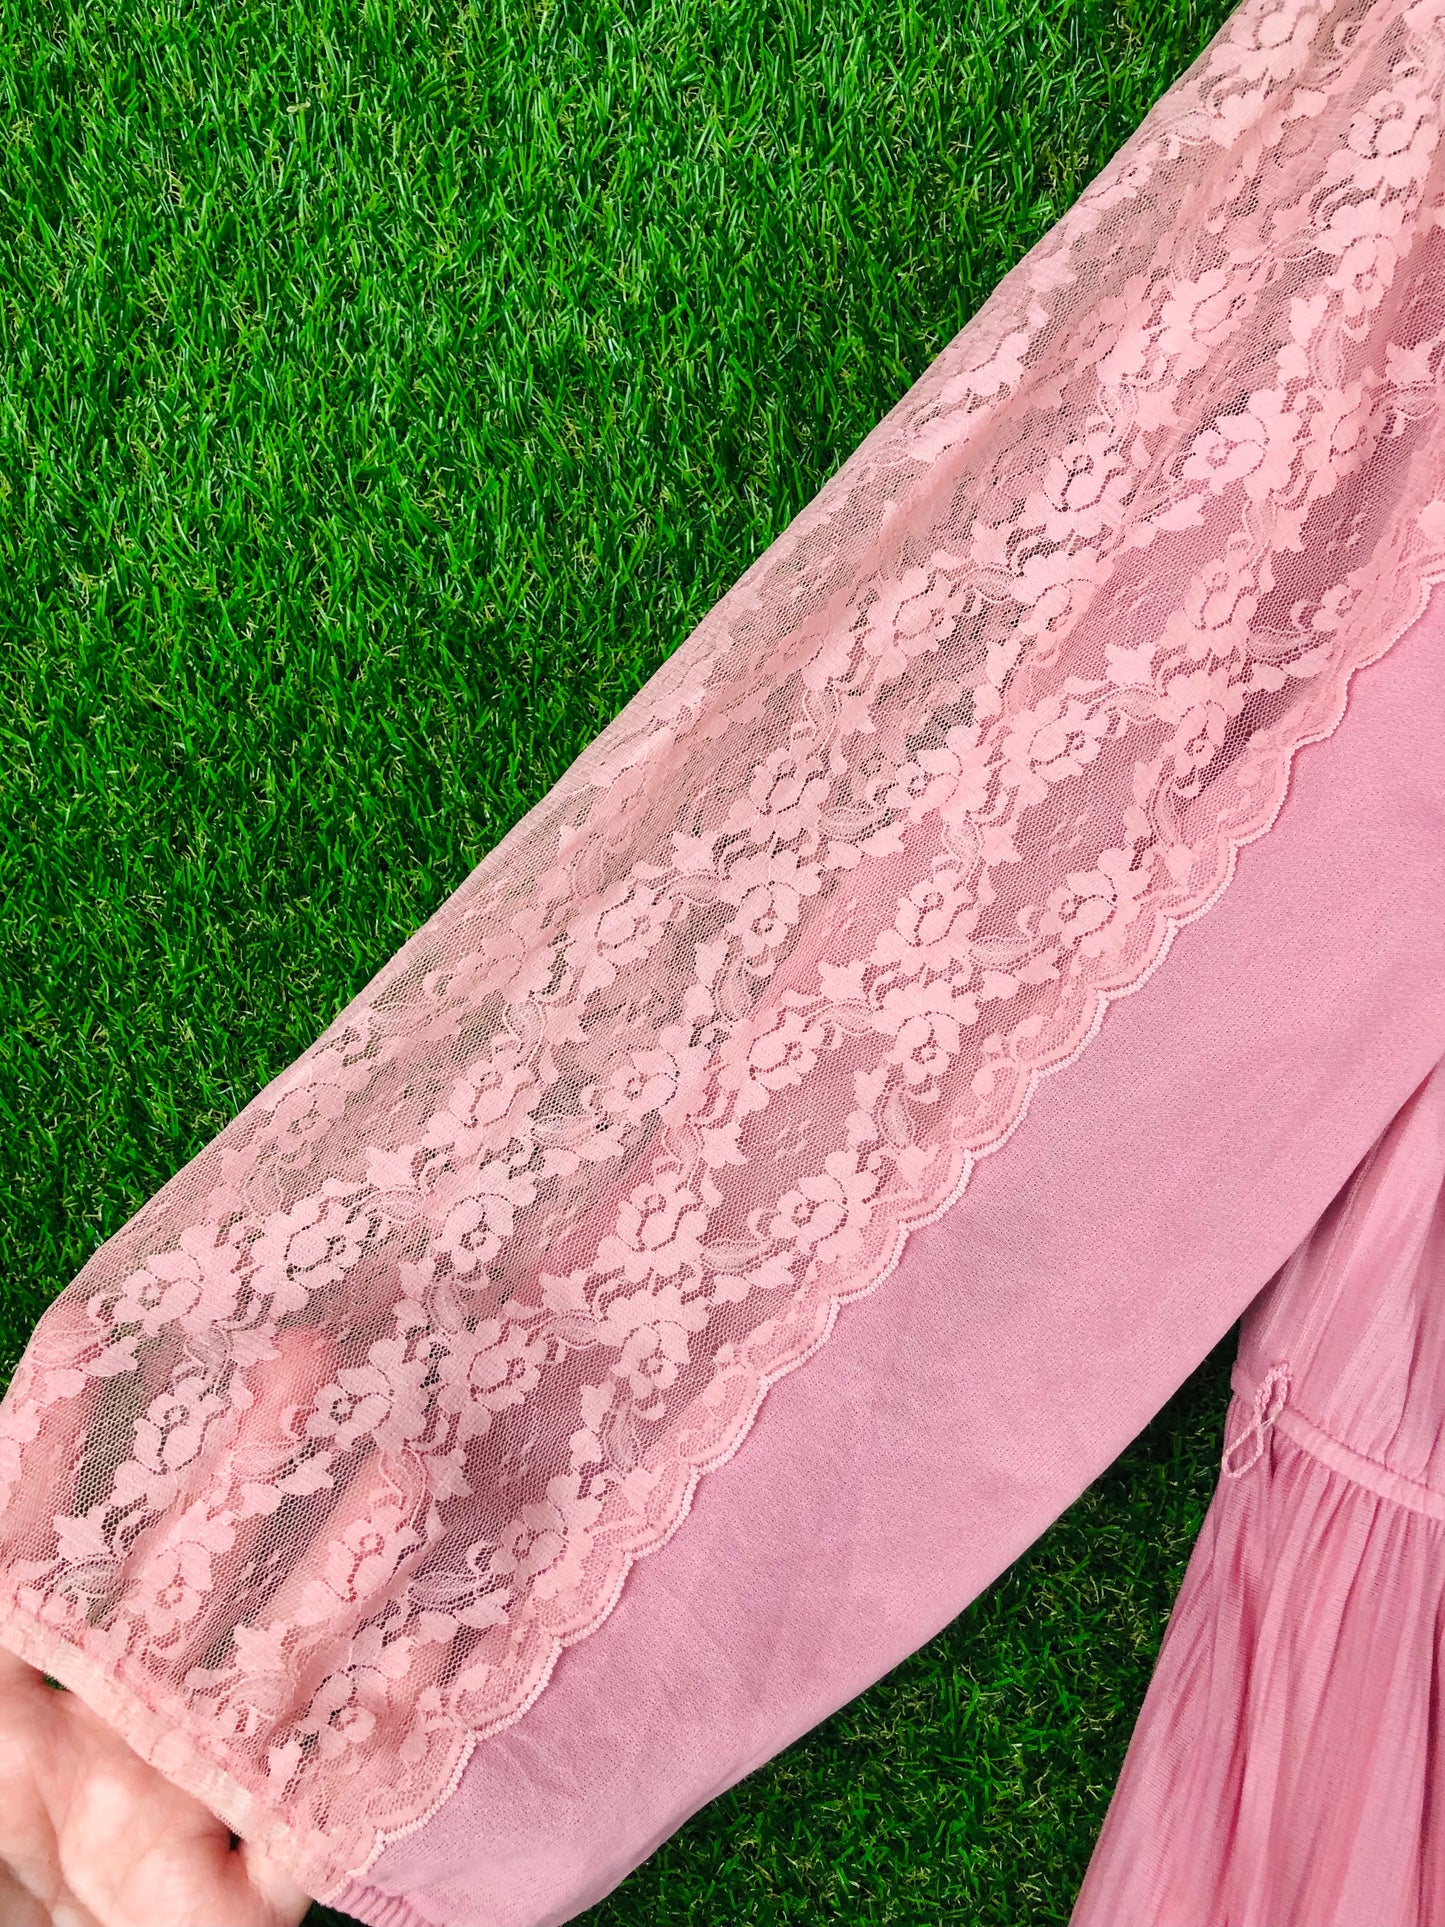 1980's Volup Pink Dress with Lace Details